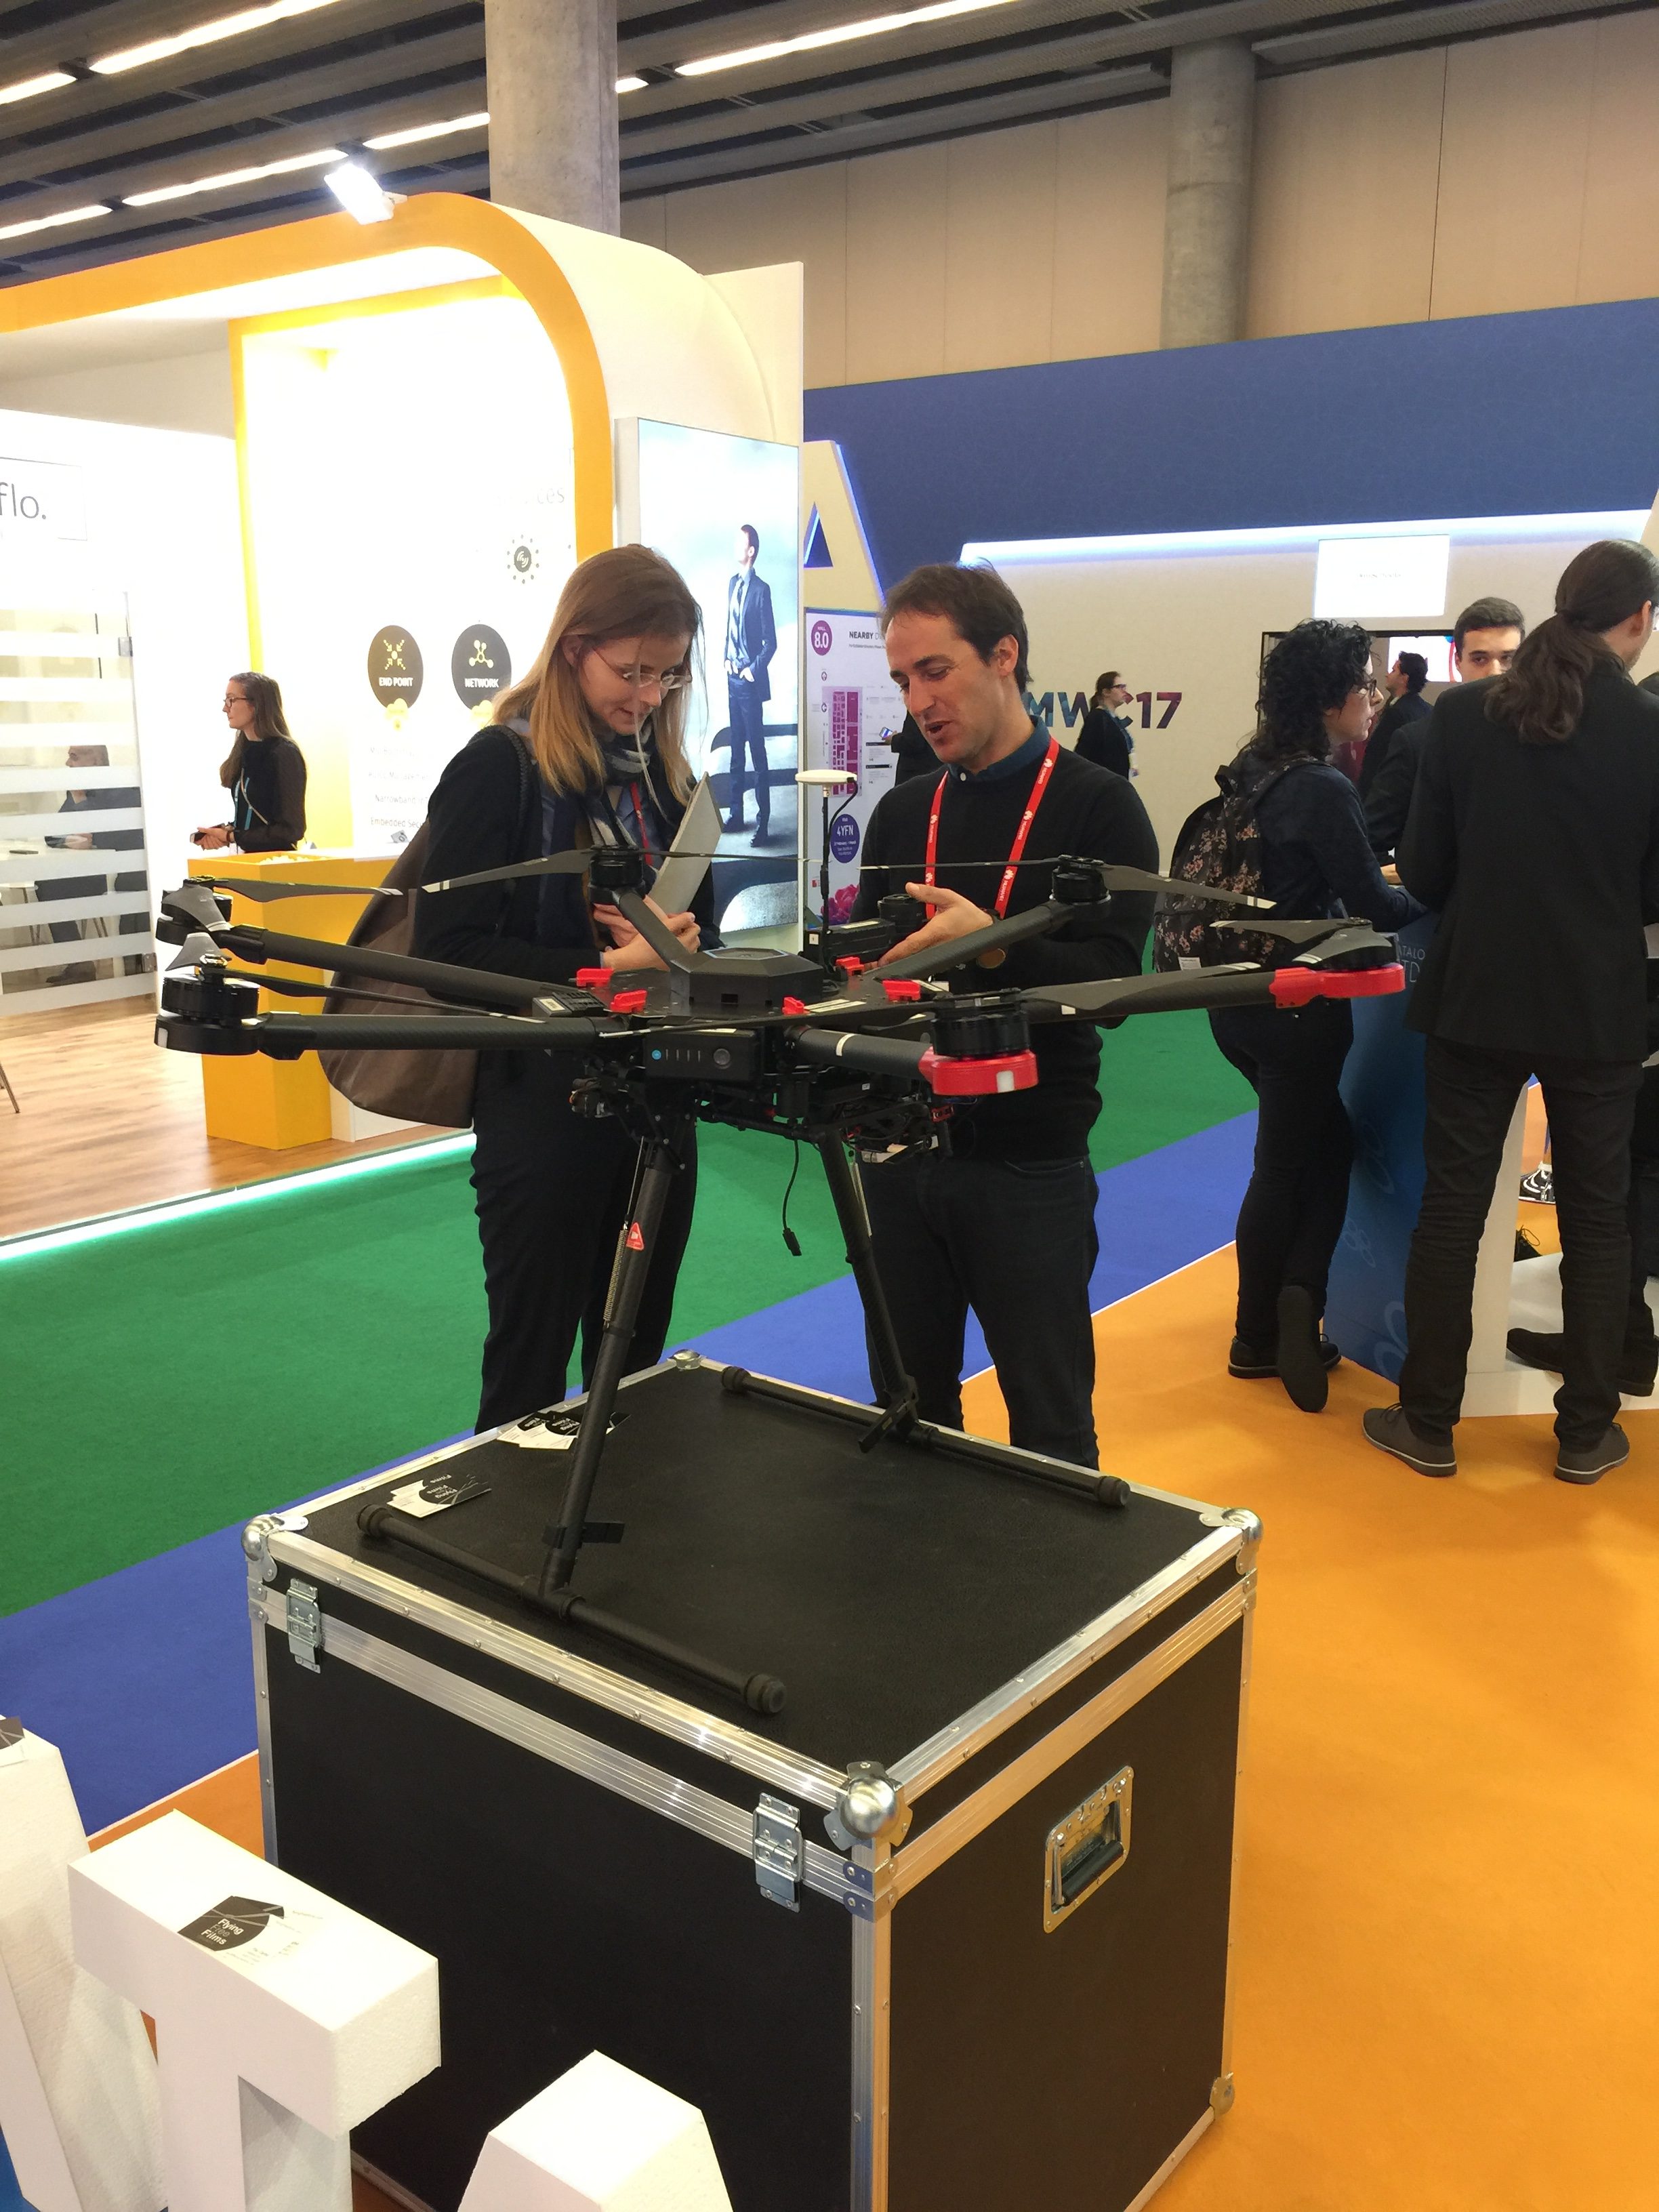 drones-at-mobile-world-congress